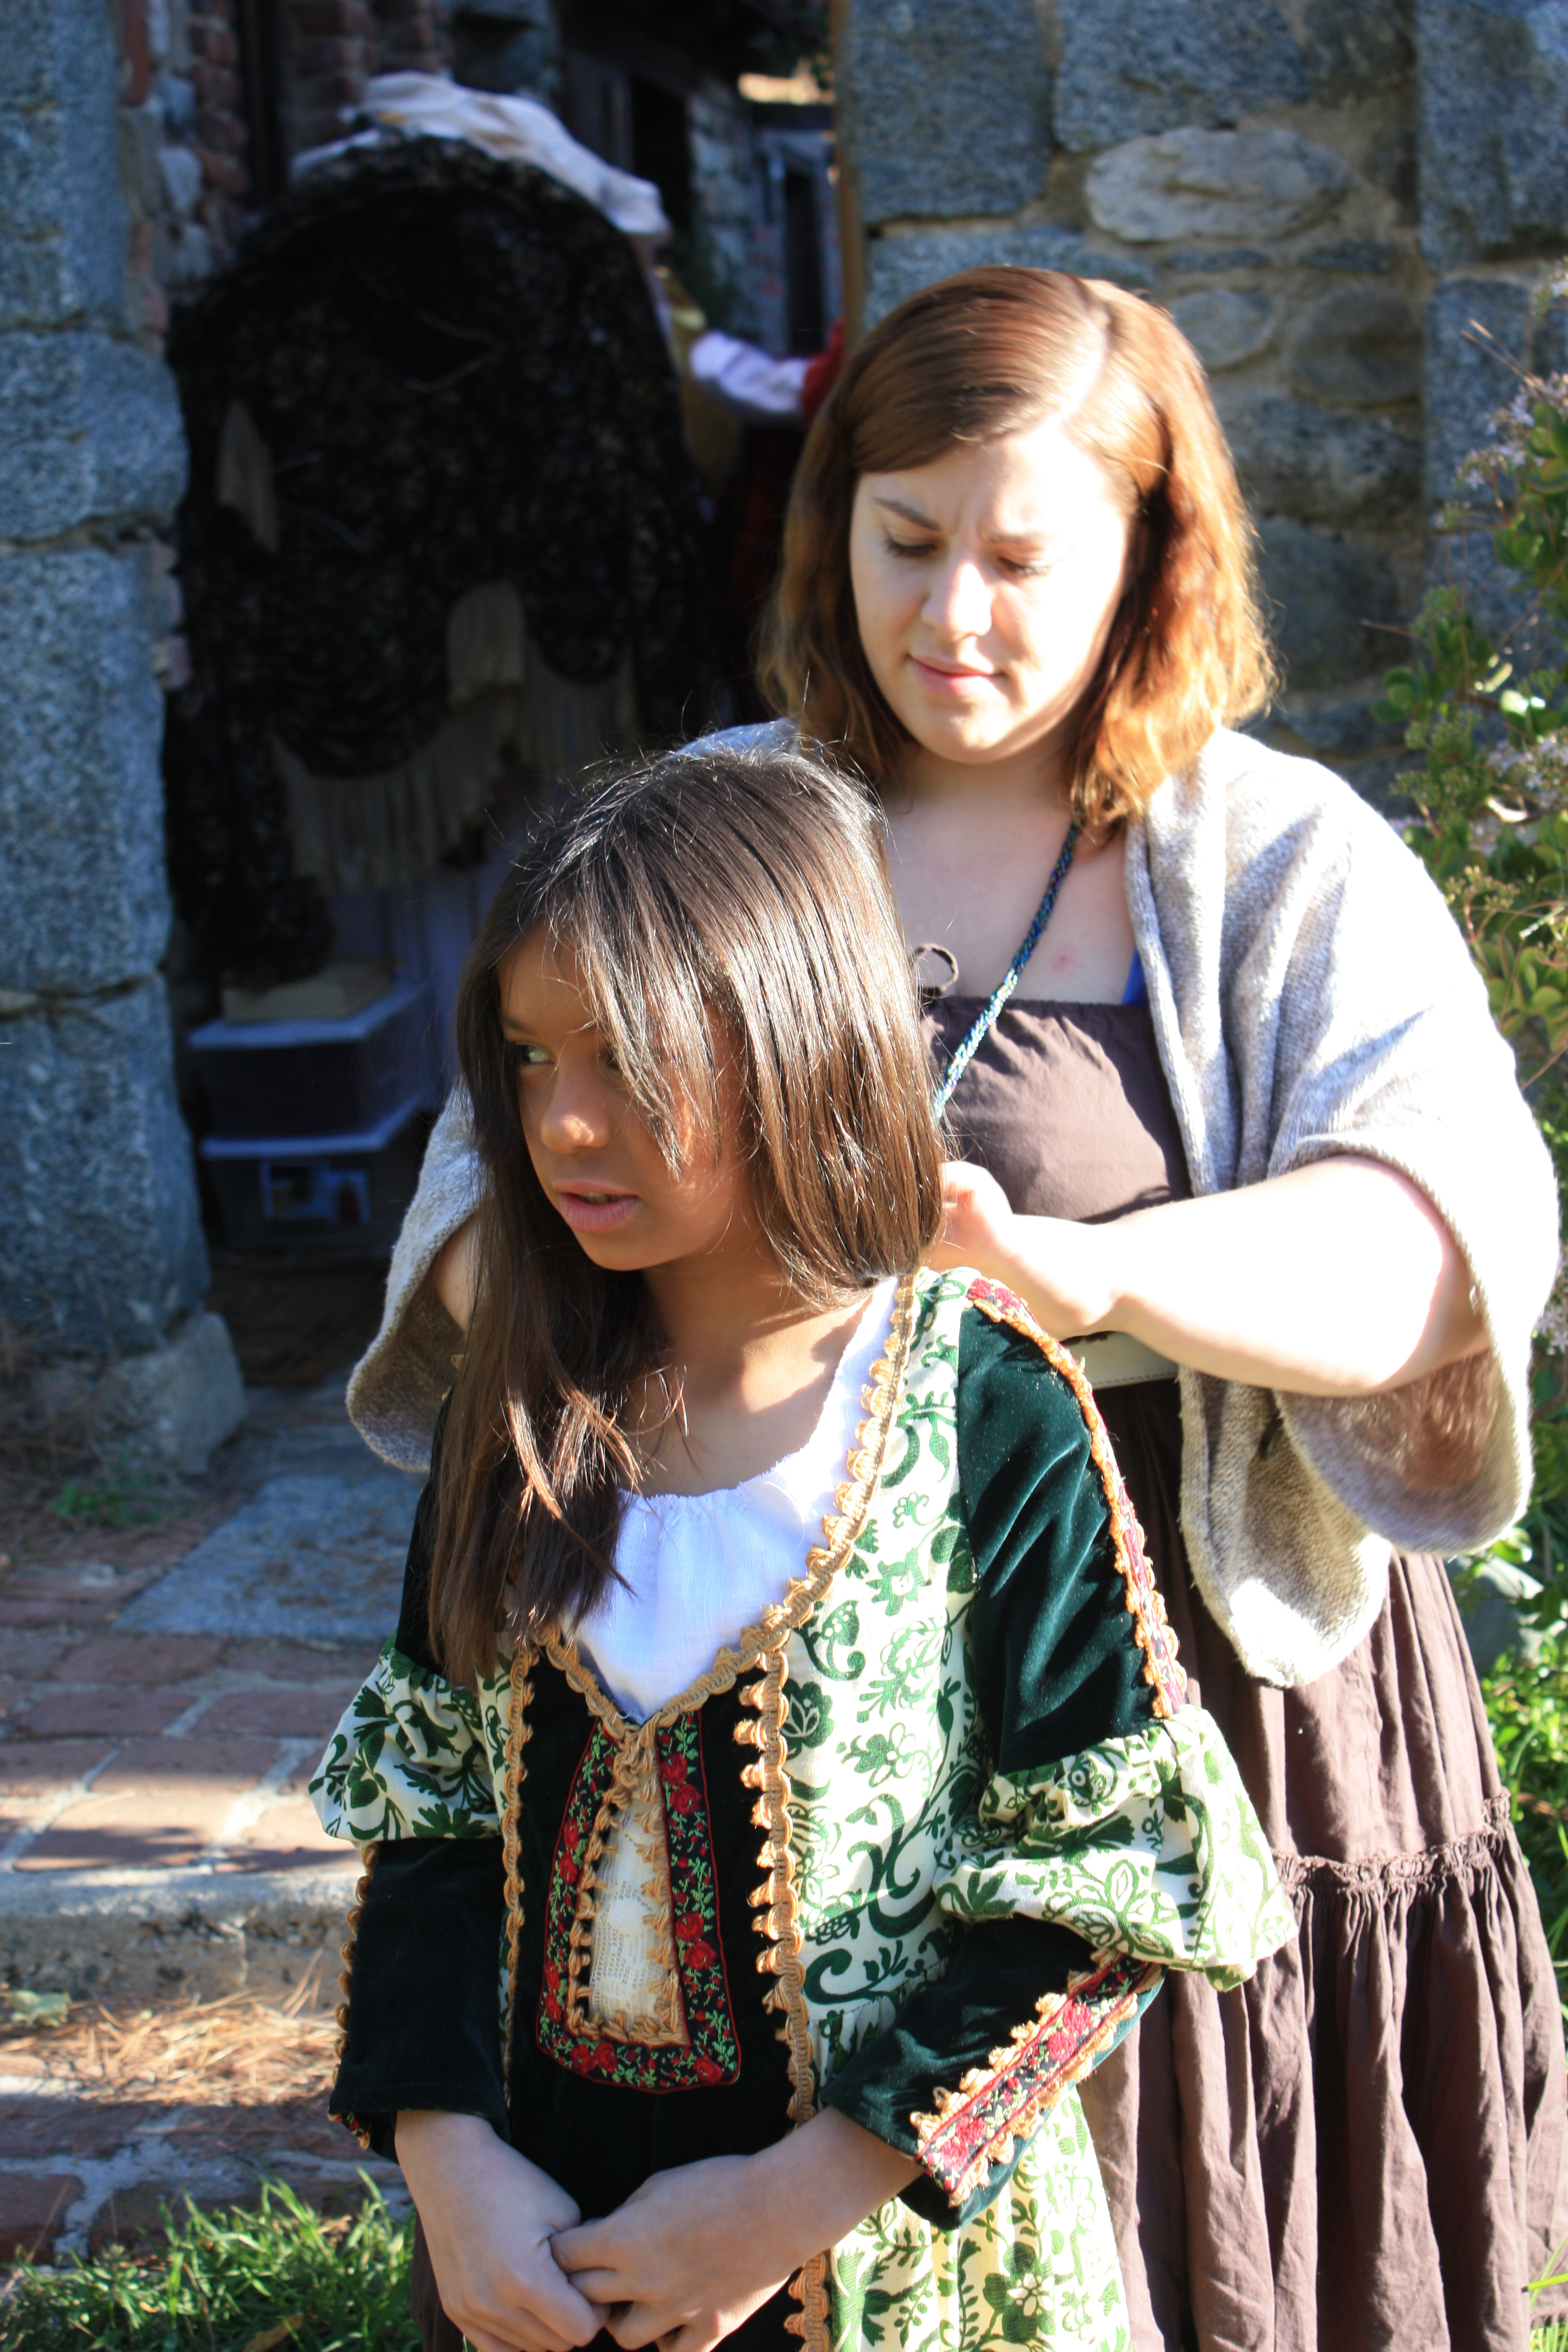 Maile on set of the film The Exquisite Tenderness of Santa Rosa de Lima